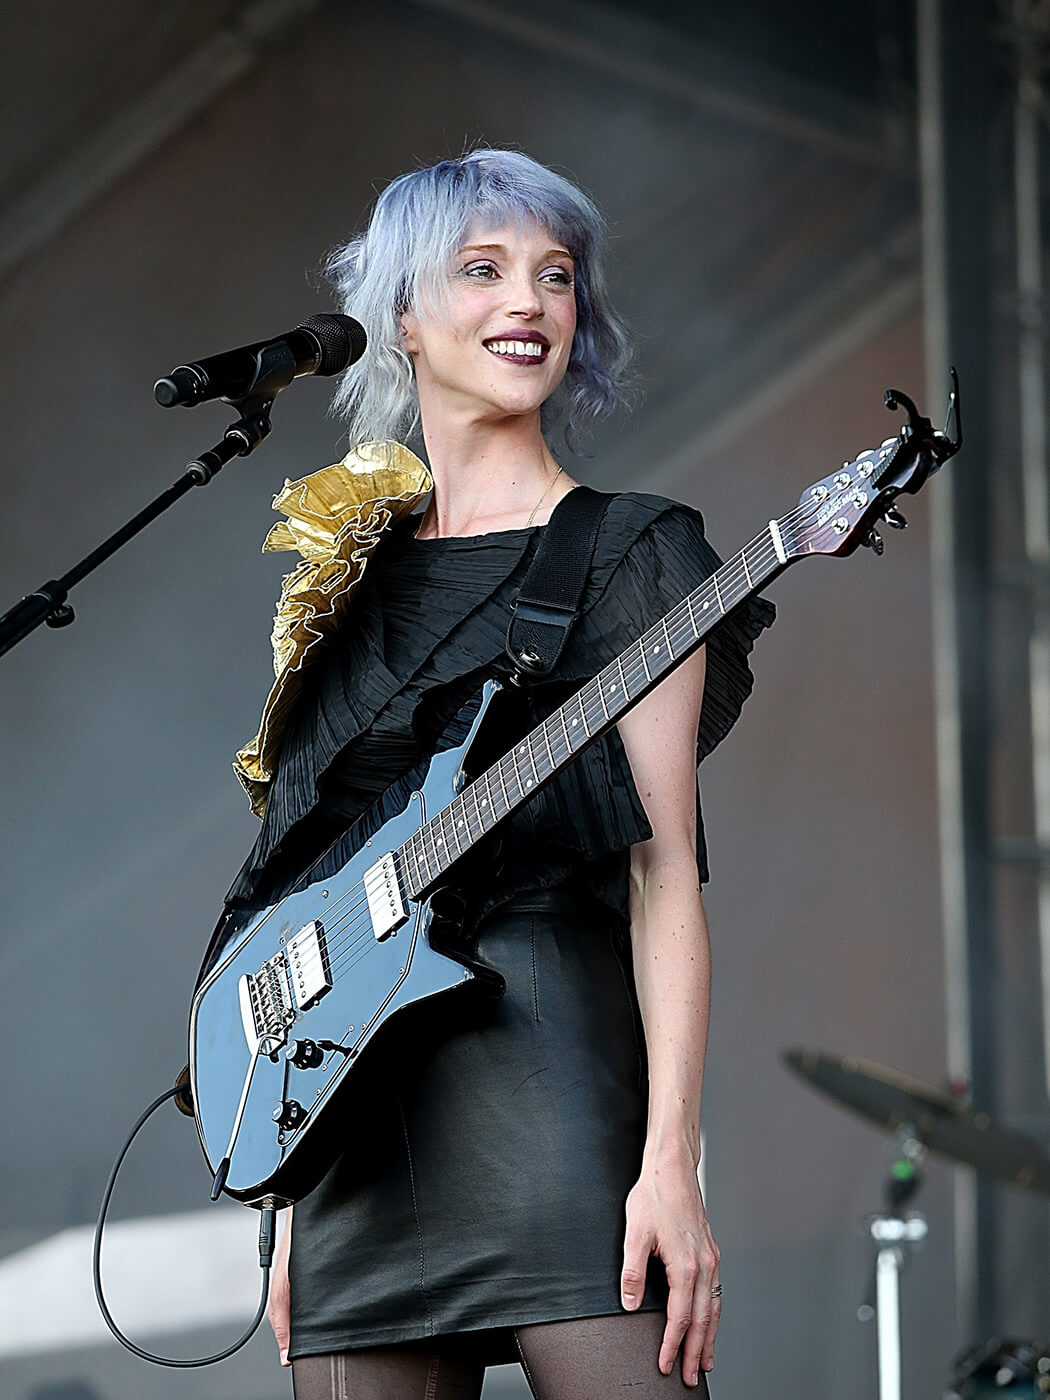 St. Vincent performs during the first day of the second weekend of the Austin City Limits Music Festival at Zilker Park on October 10, 2014 in Austin, Texas.